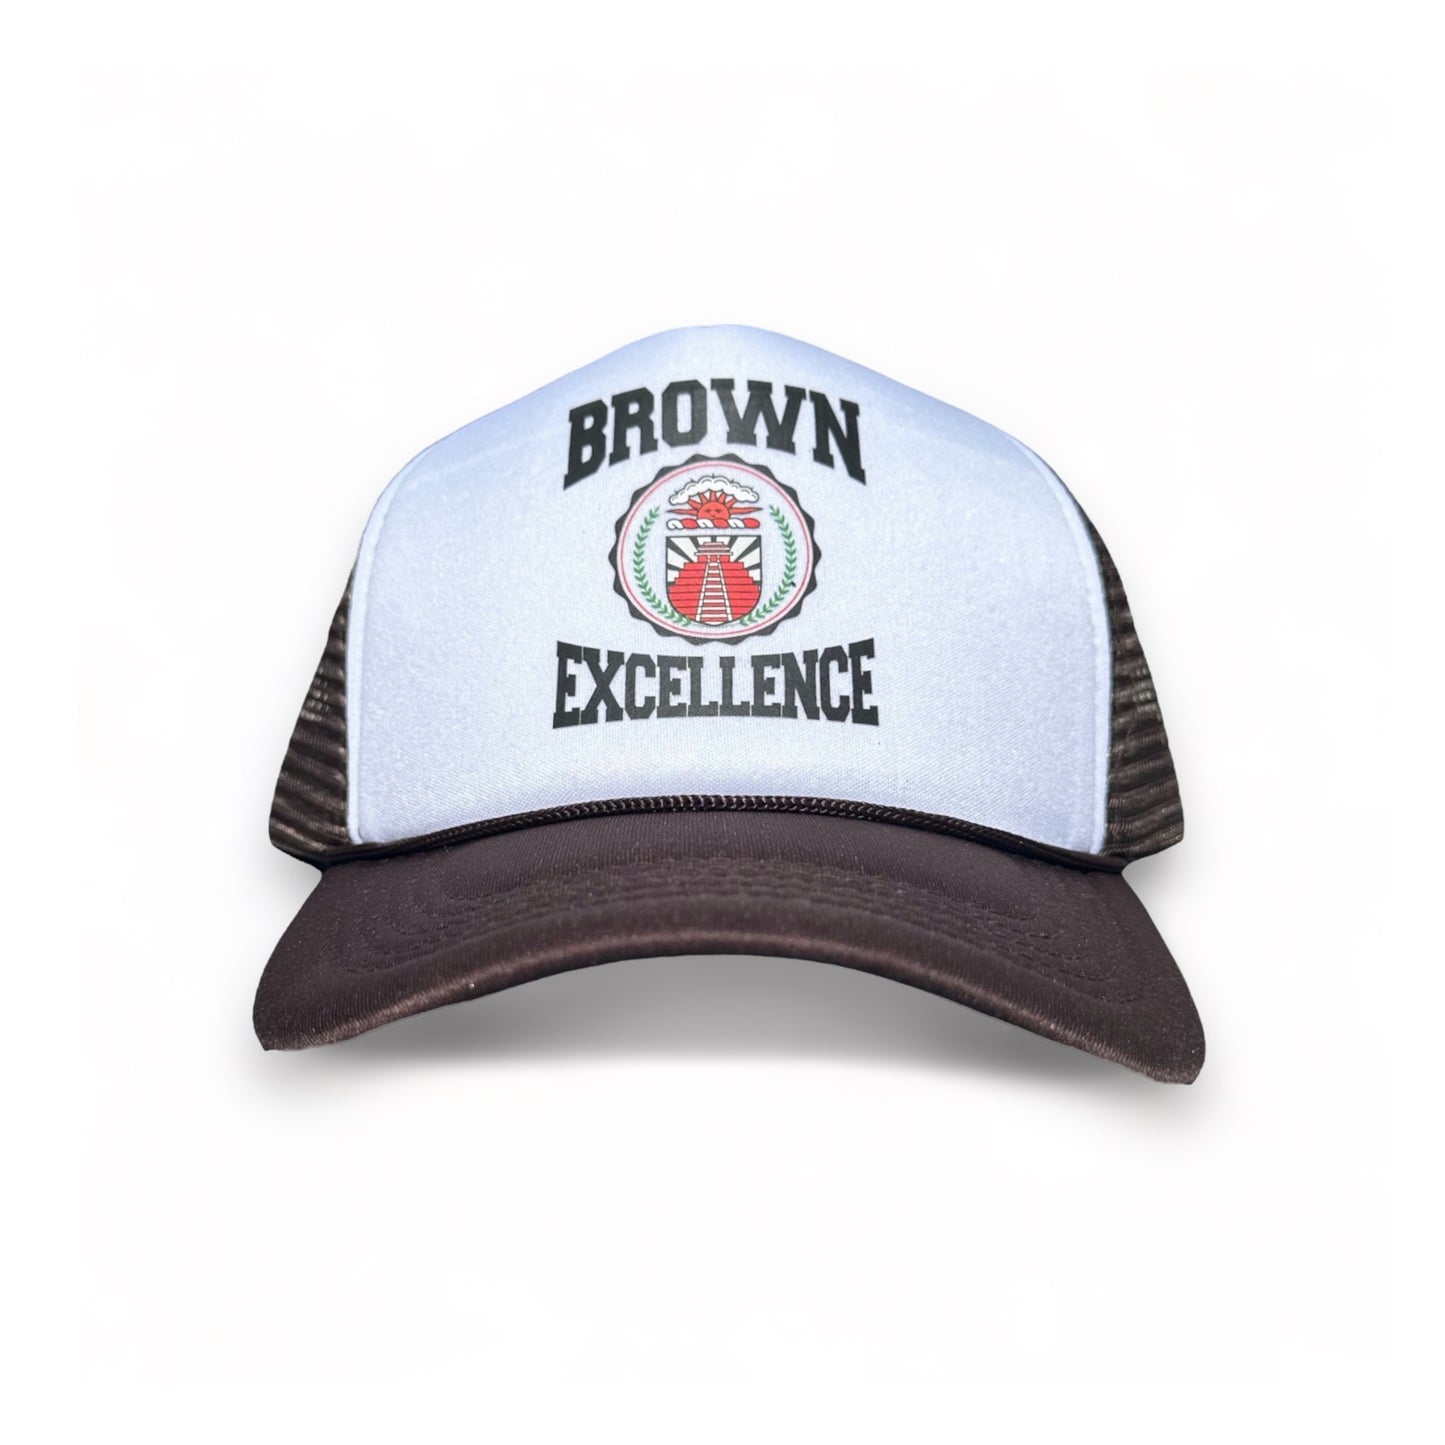 BROWN EXCELLENCE TRUCKER - BROWN/WHITE